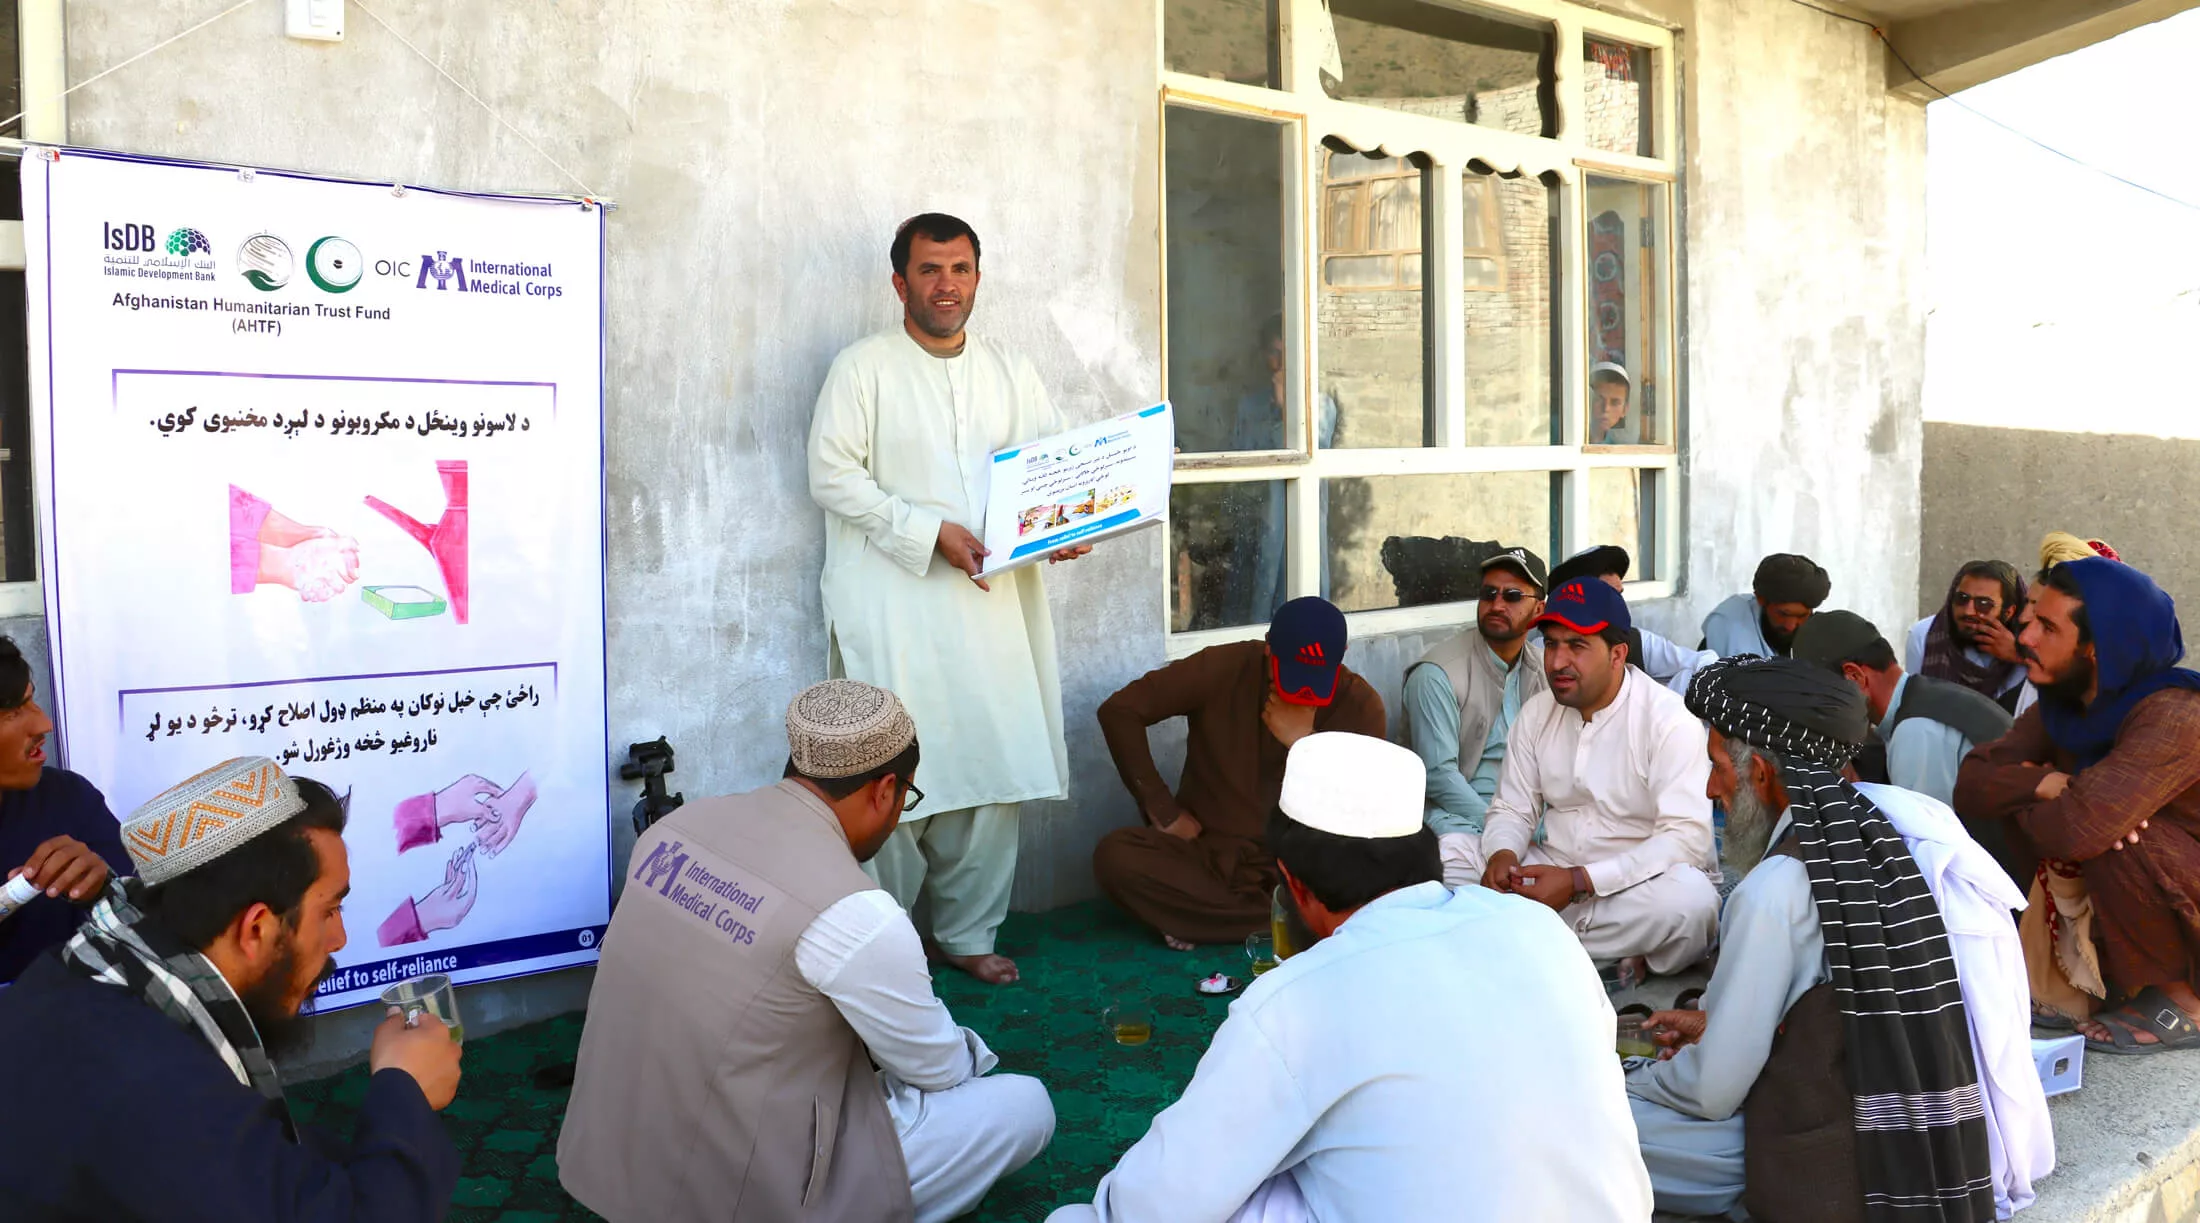 A member of our water, sanitation and hygiene team conducts a hygiene promotion session in Paktika province.